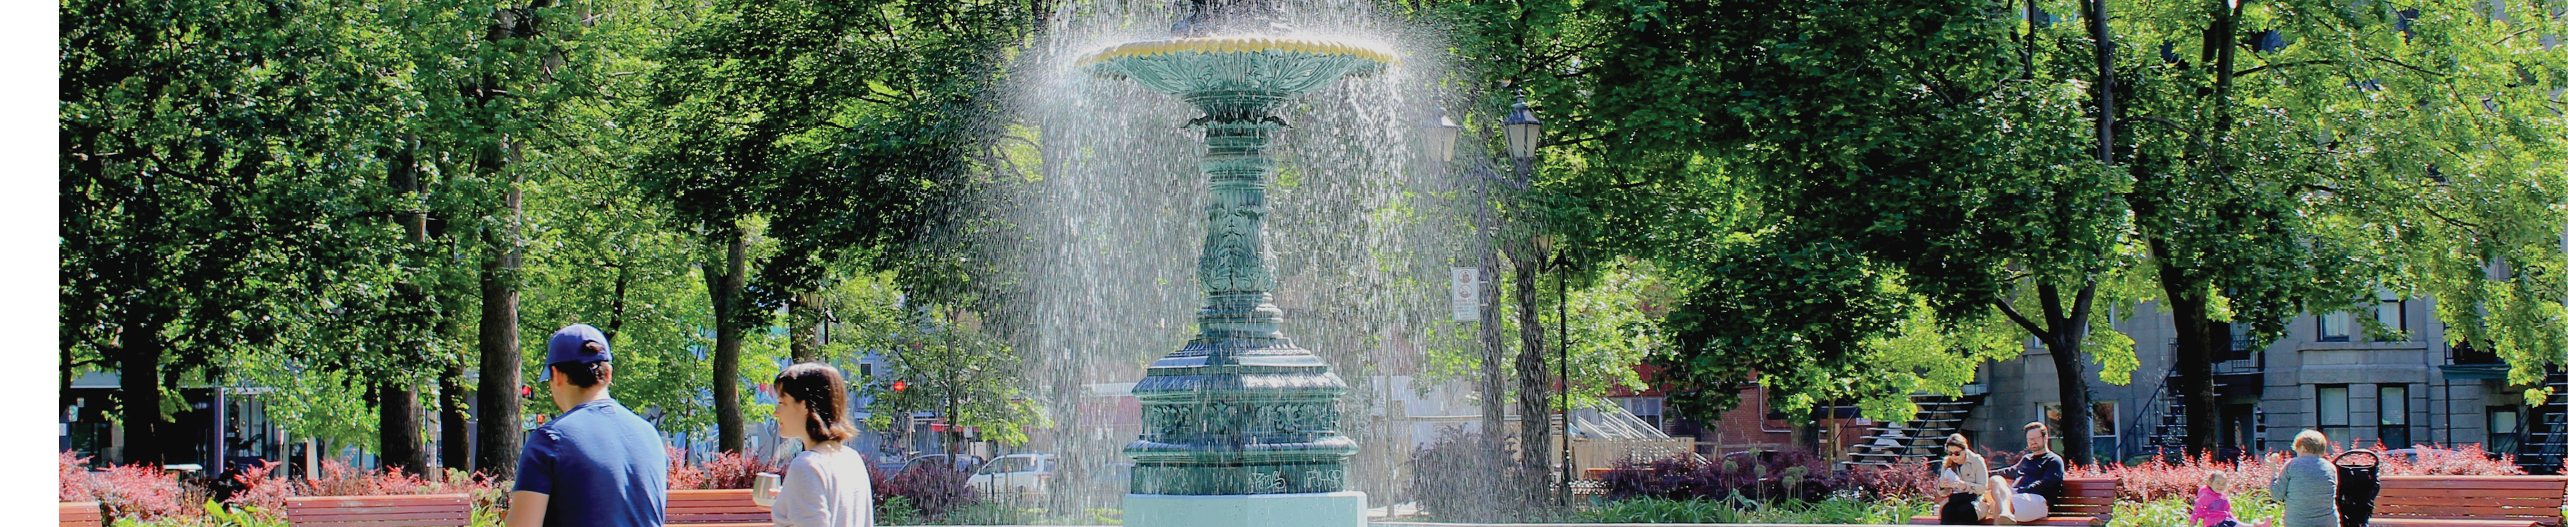 Montreal, Quebec   Canada - June 16 2019: Square Saint Louis in Plateau Mont Royal neighborhood known as Little France,with beautiful European lifestyle  Fountain among green leaves on hot summer day 